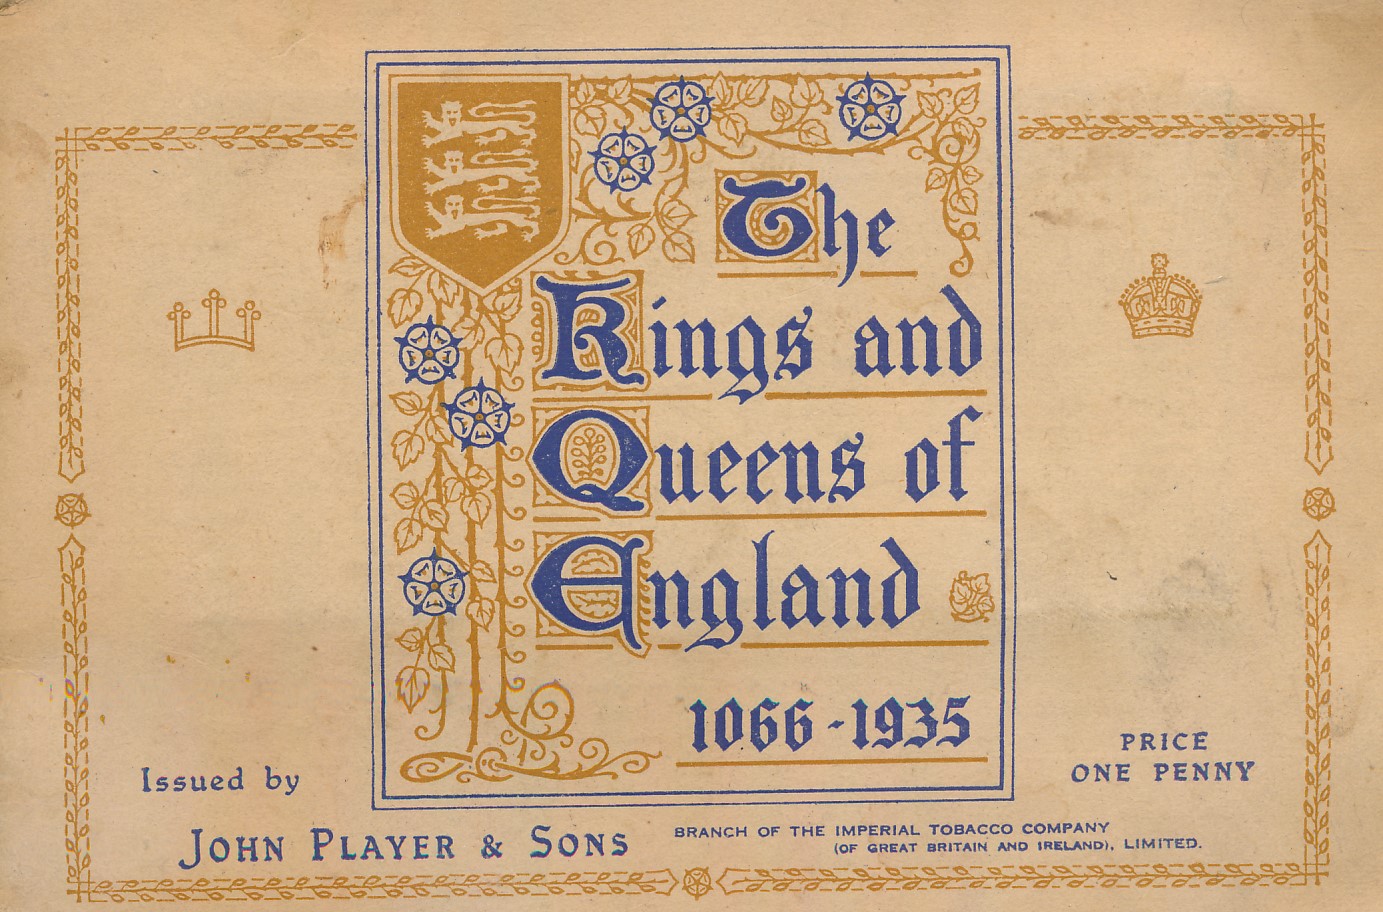 The Kings and Queens of England. 1066 - 1935